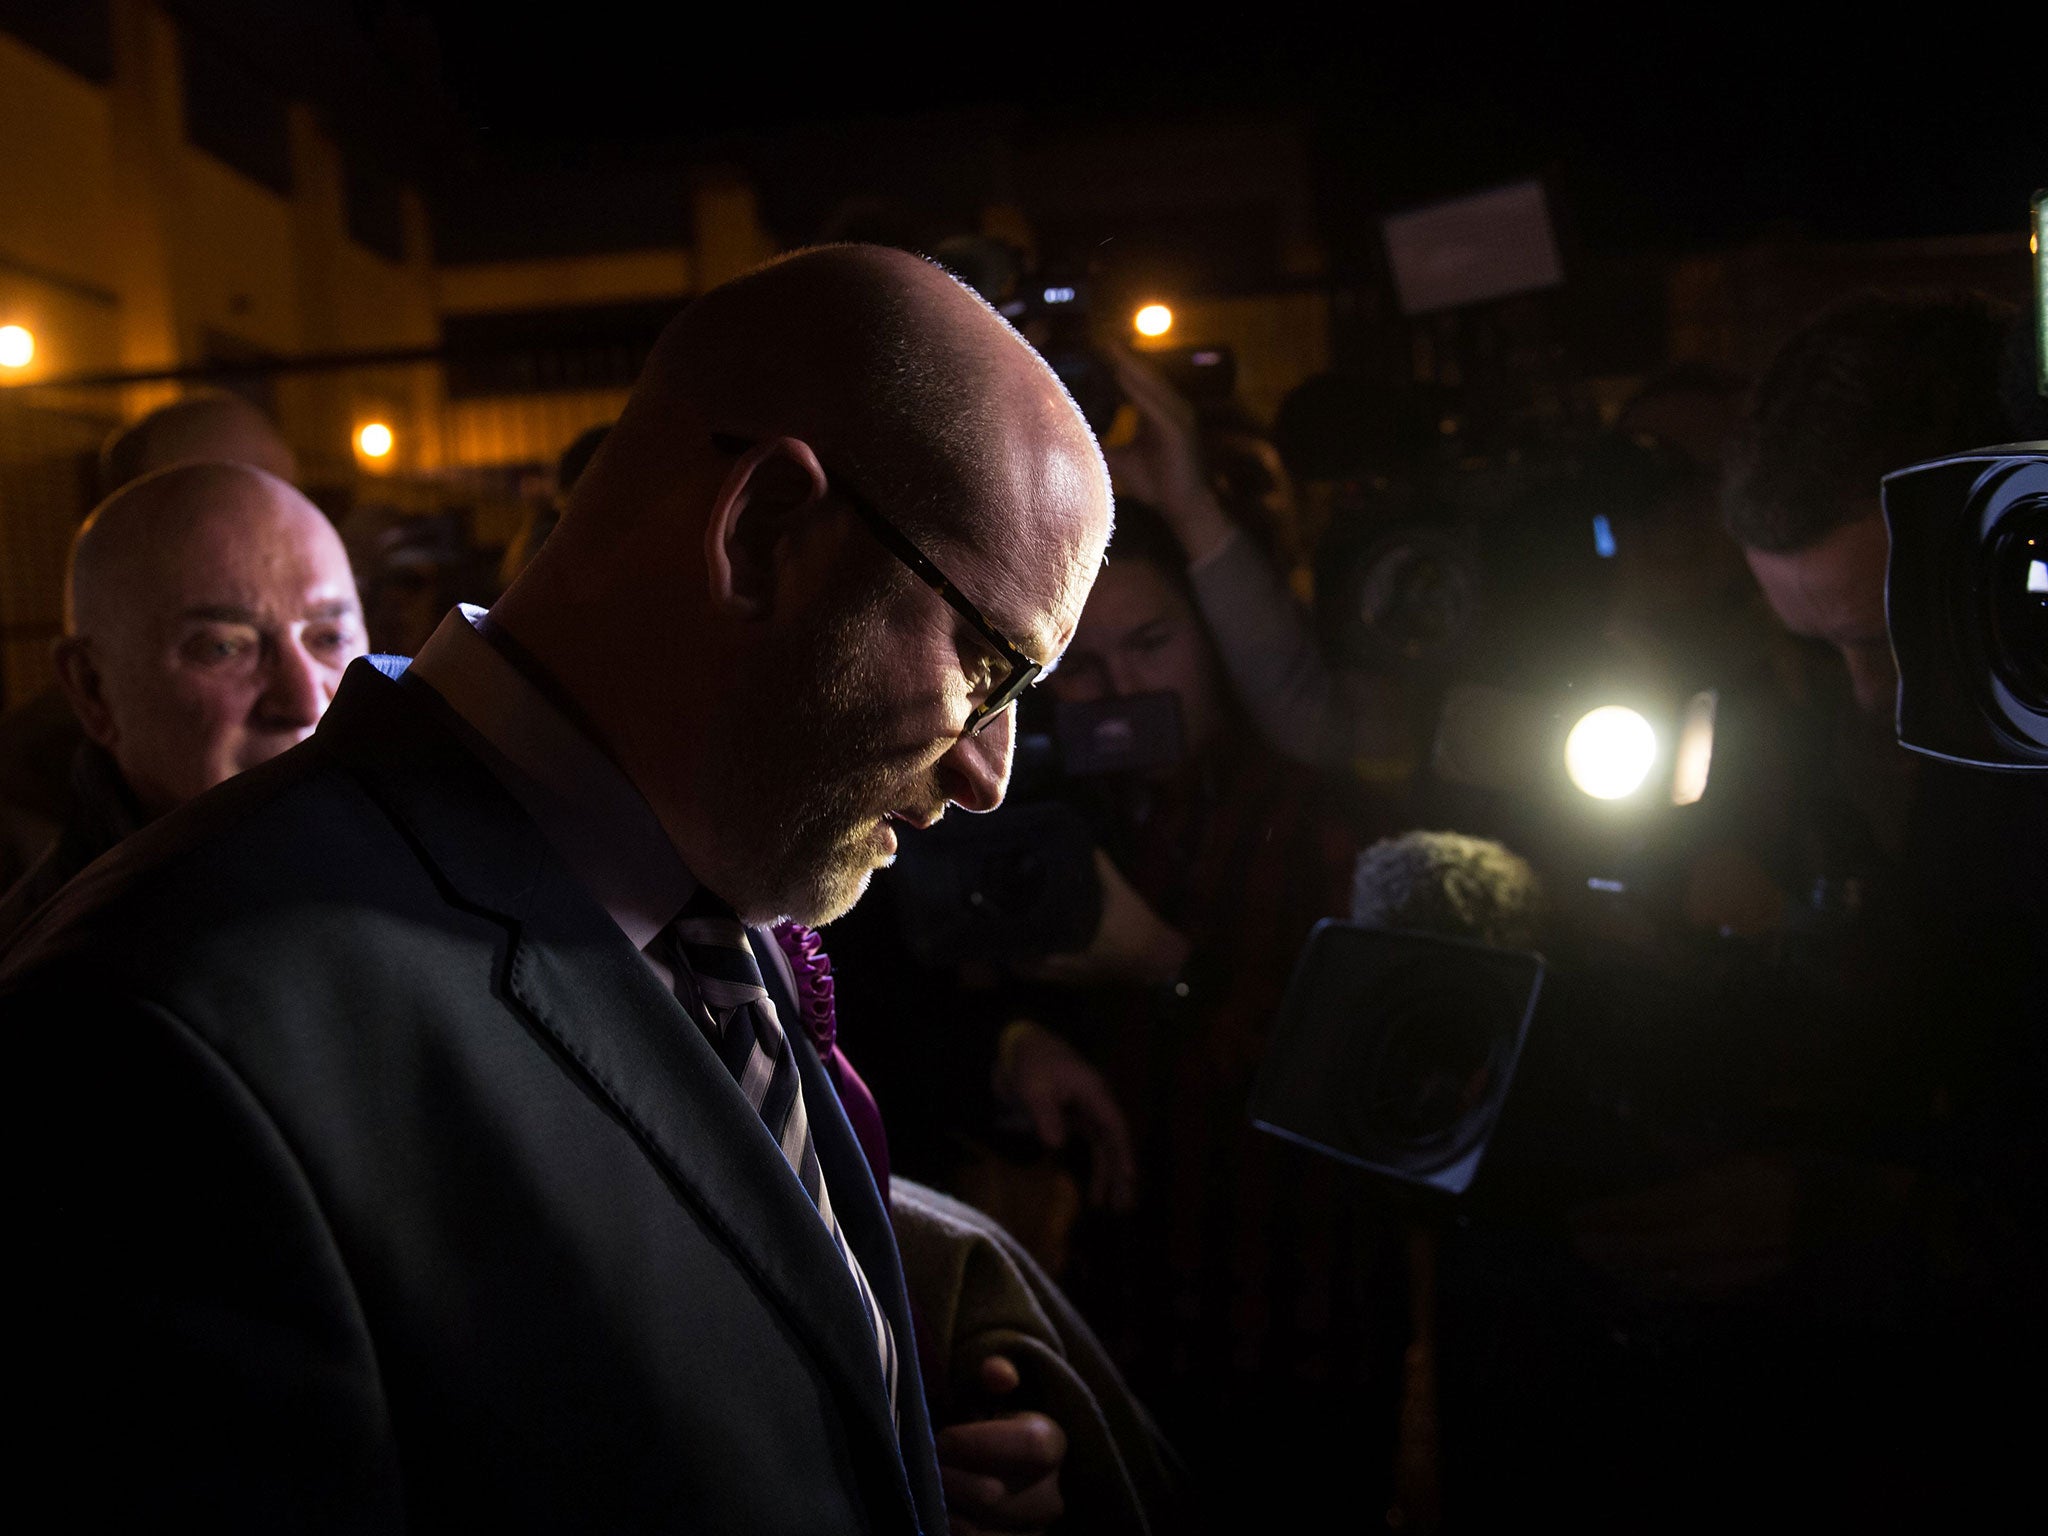 Ukip leader Paul Nuttall leaves the Fenton Manor sports complex after being defeated in the Stoke-on-Trent Central by-election